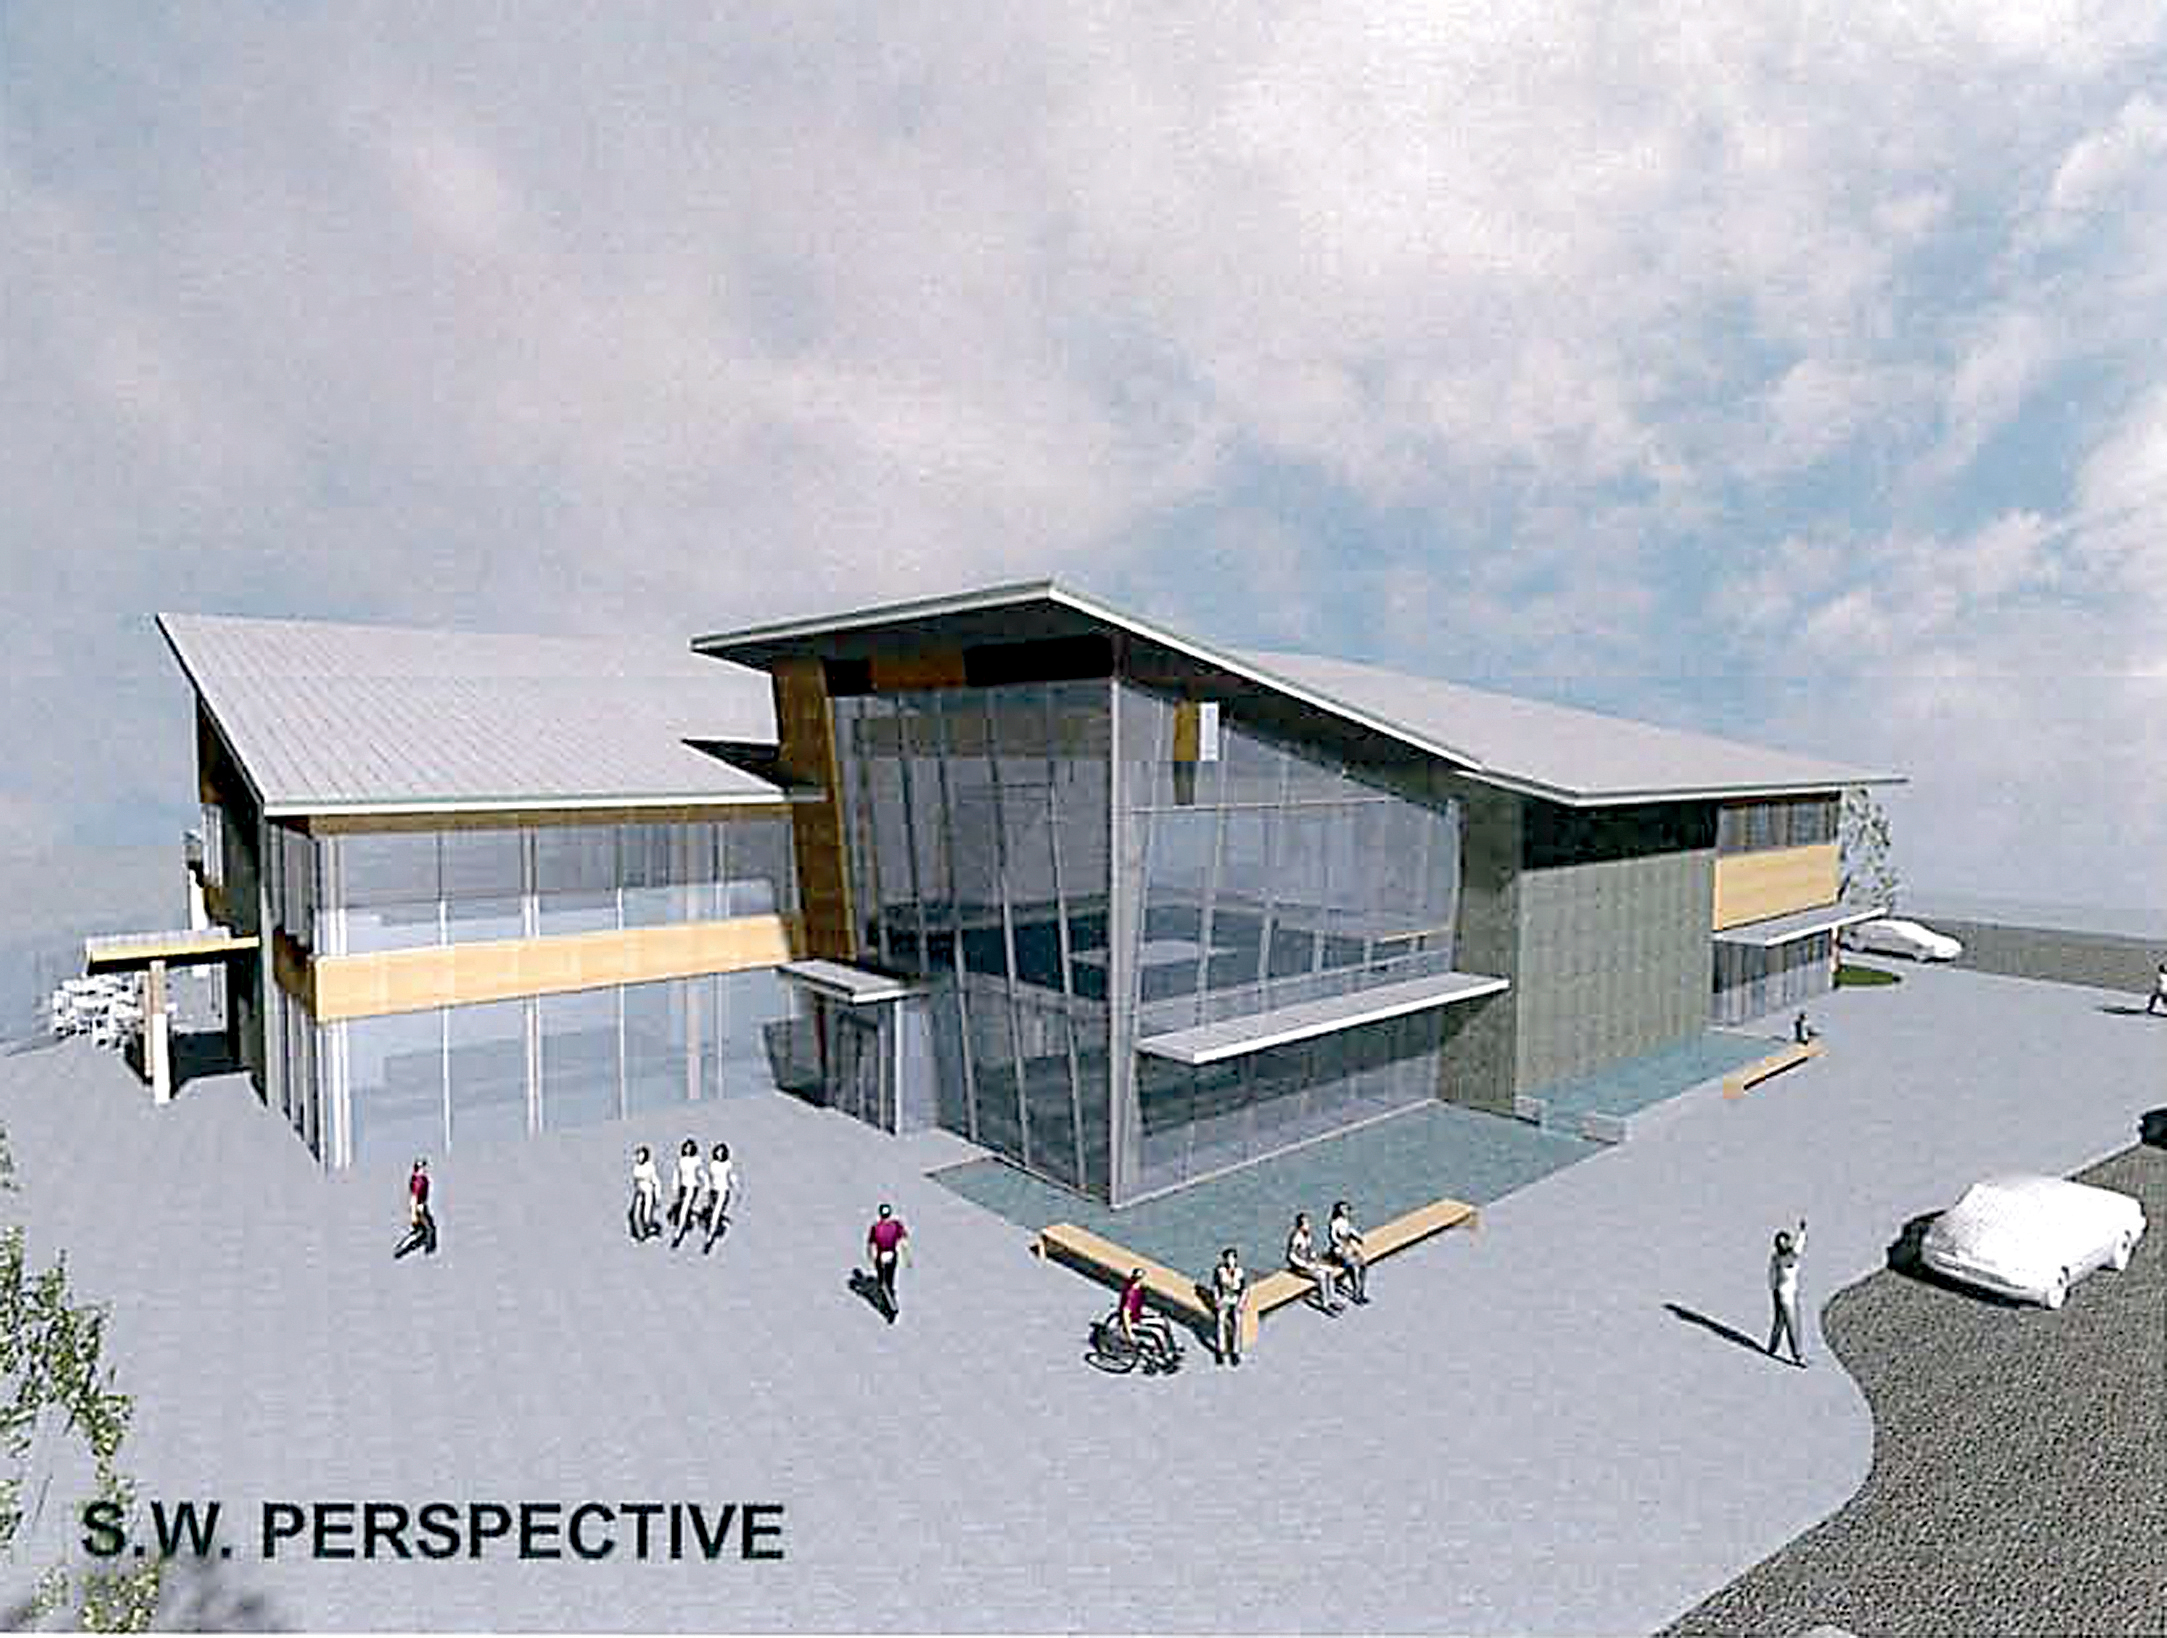 A rendering of a proposed marine science and conference center at the corner of Front and Oak streets in Port Angeles. — Neeser Construction Inc.